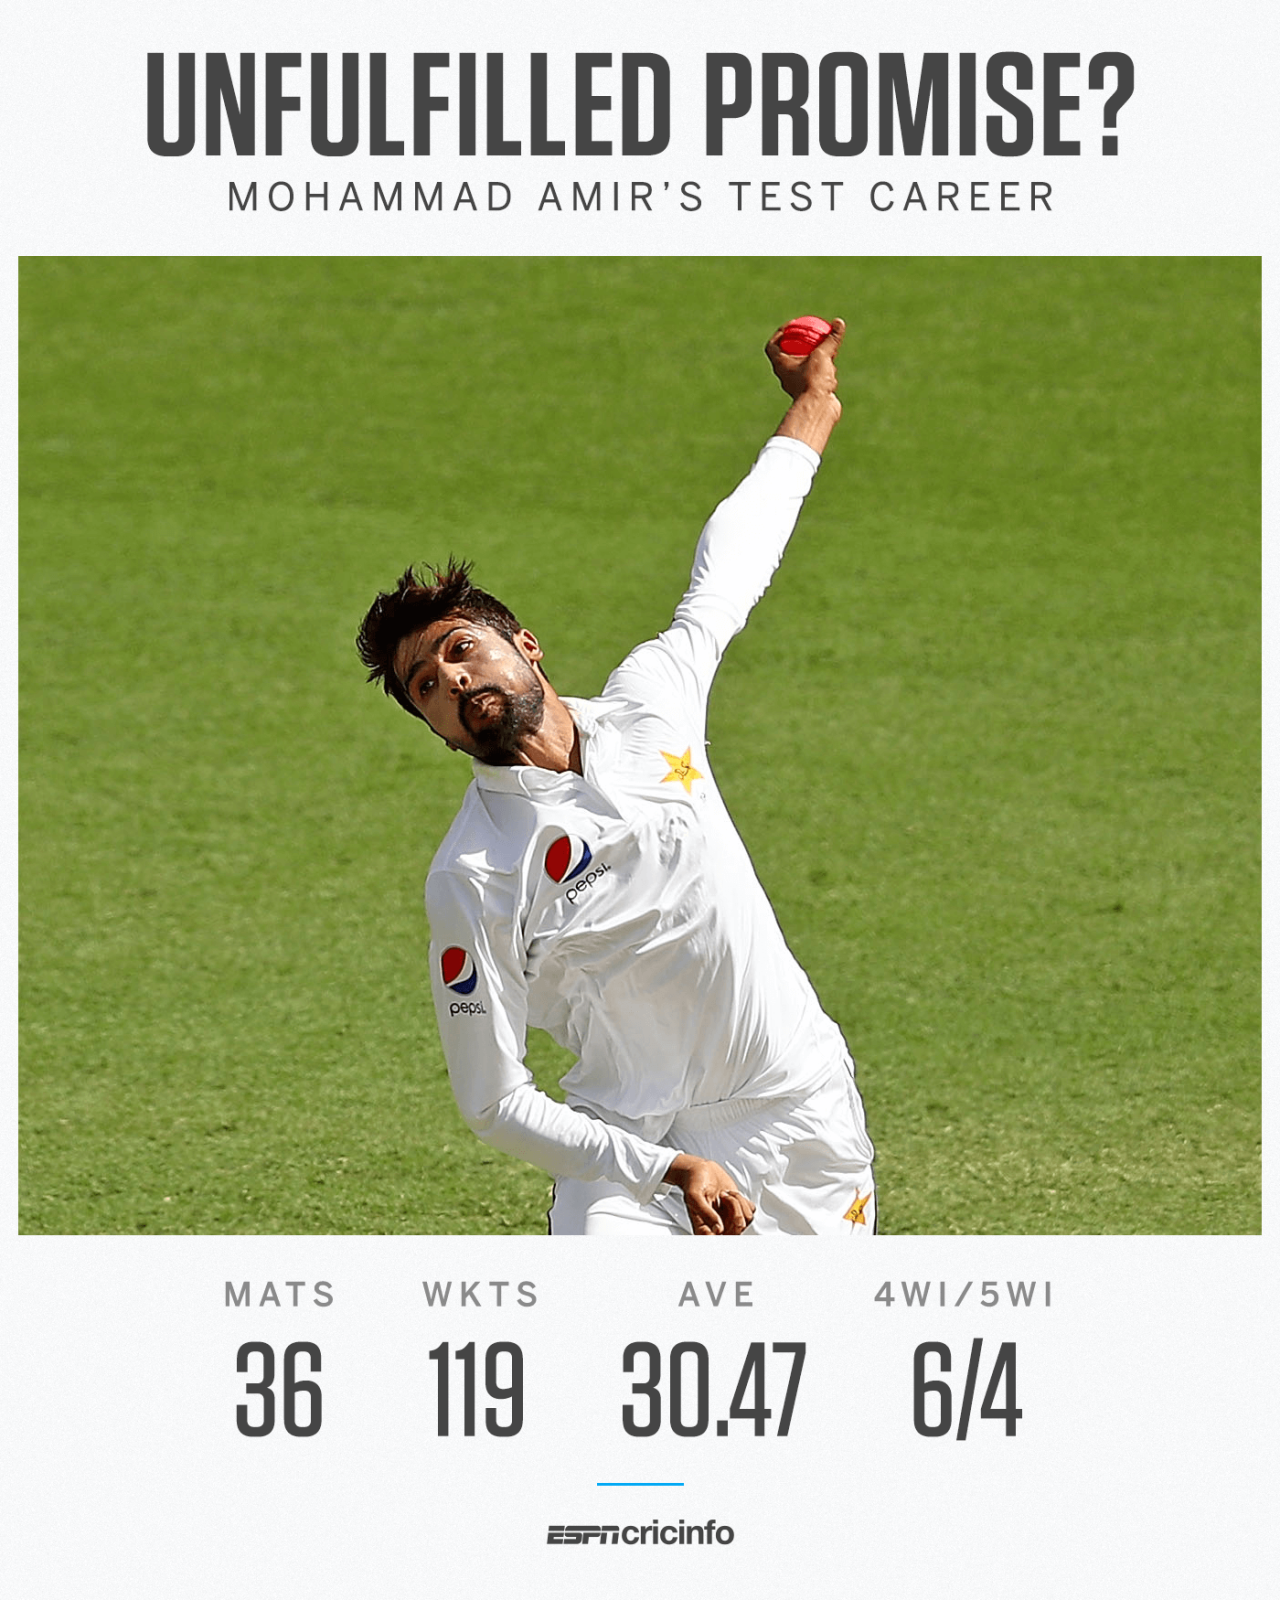 Has Mohammad Amir lived up to his potential?